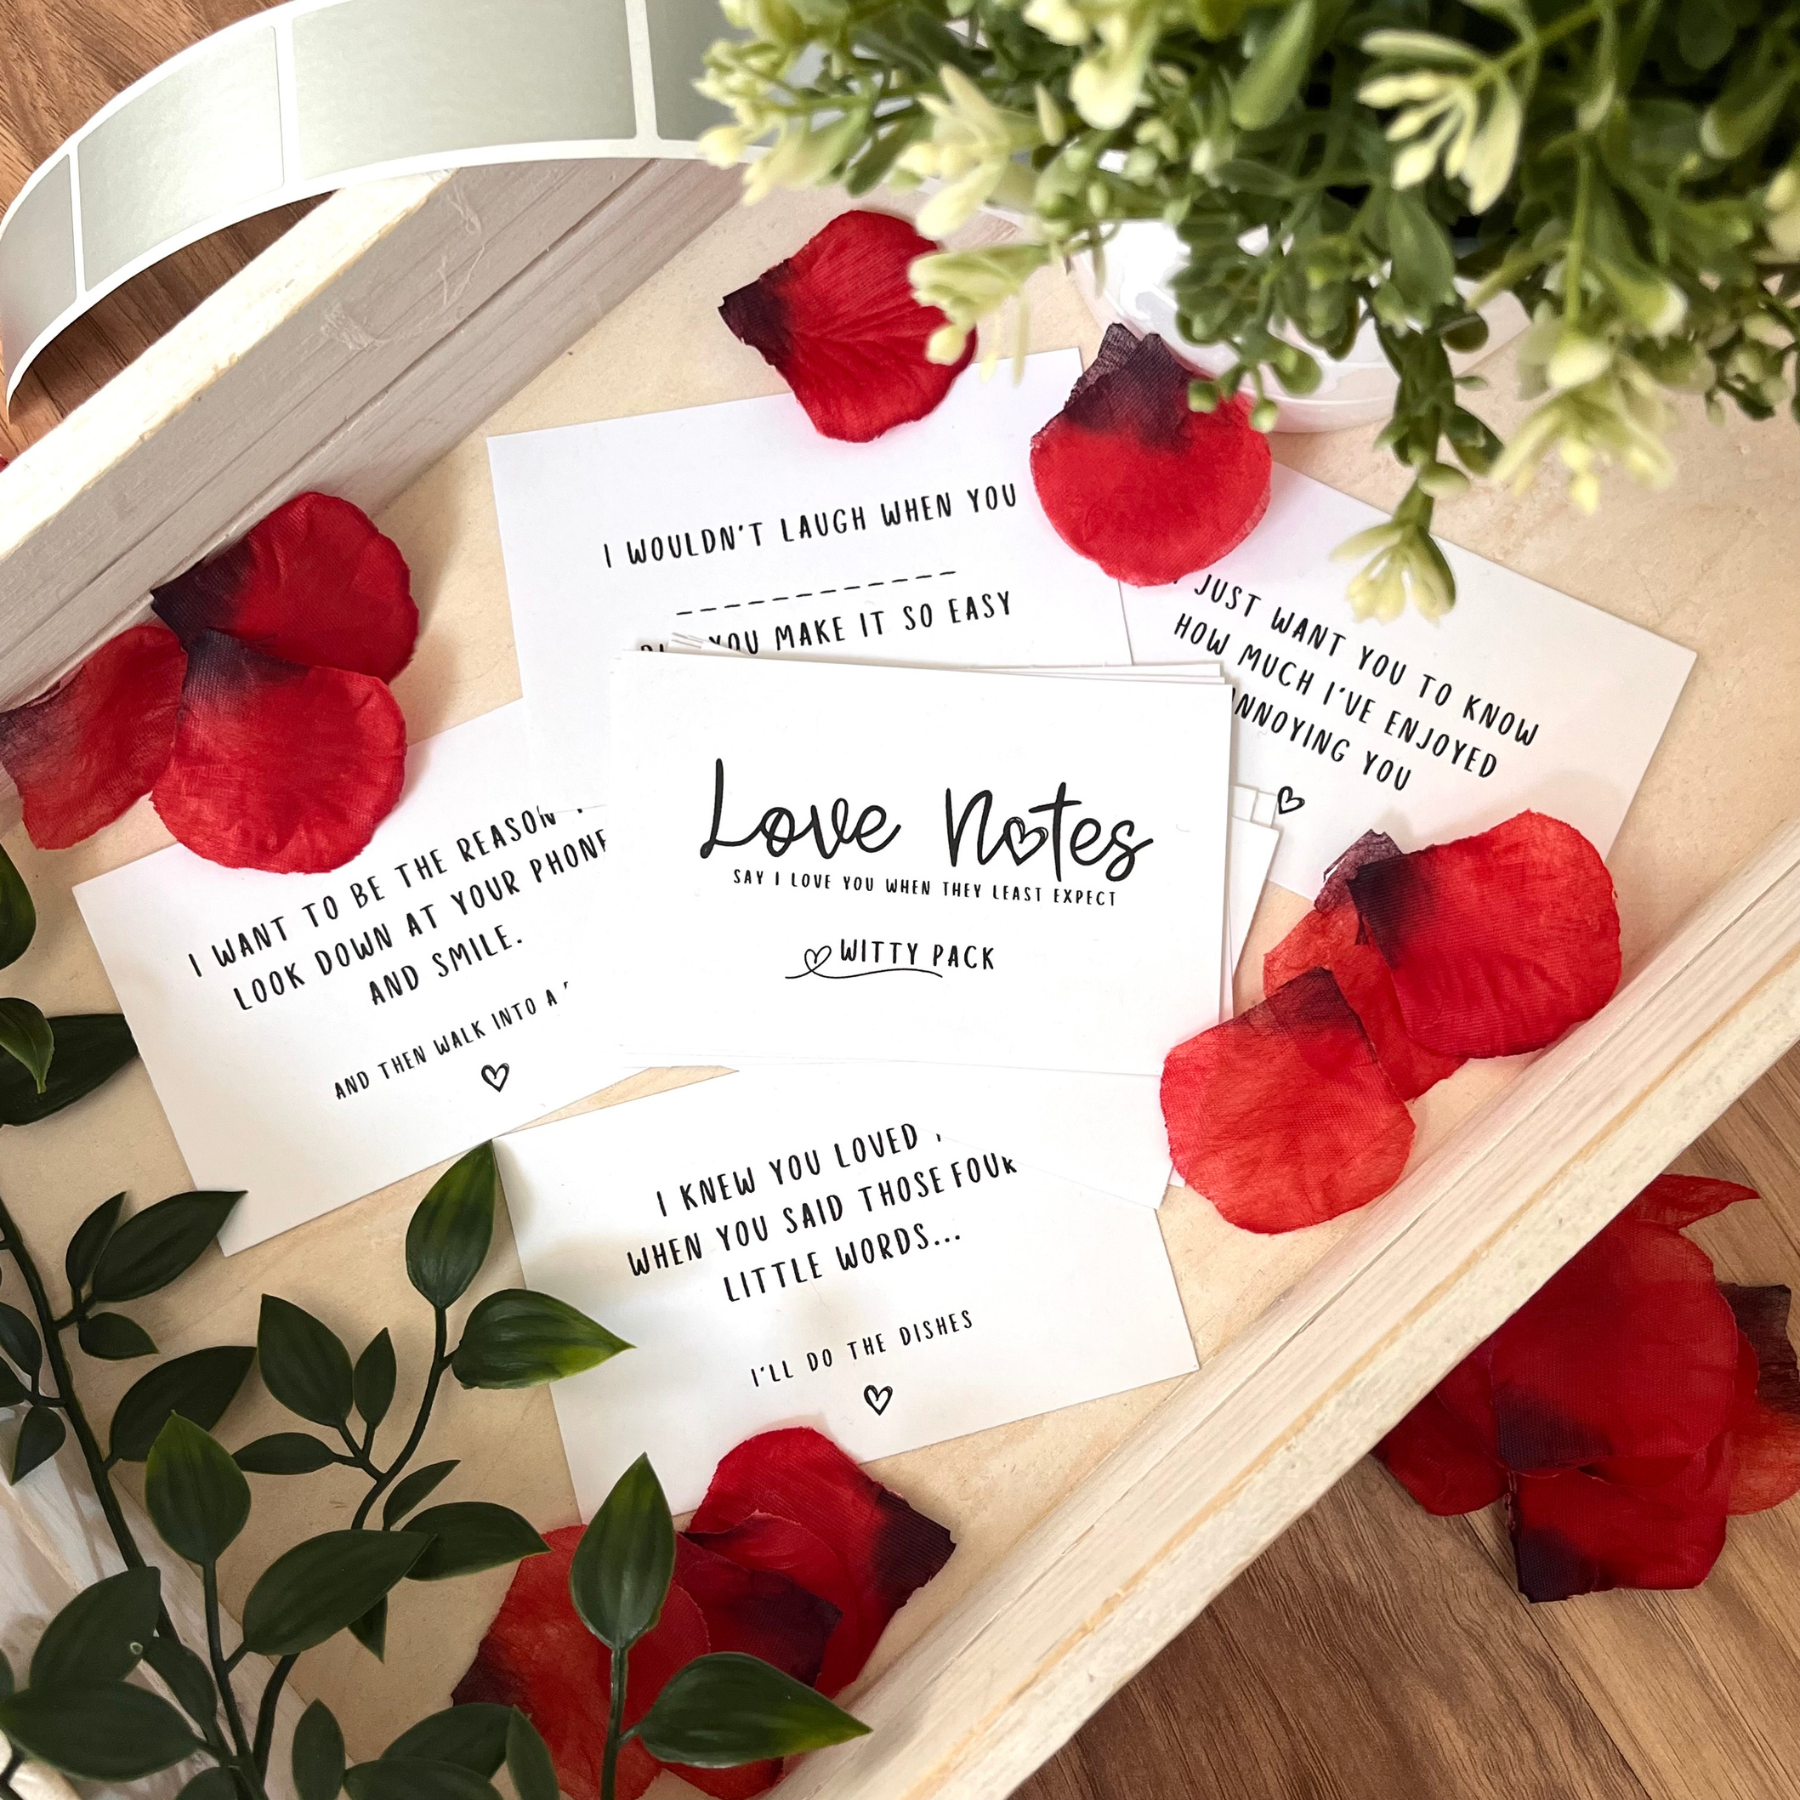 Red Roses + Petals = LOVE Romance Package